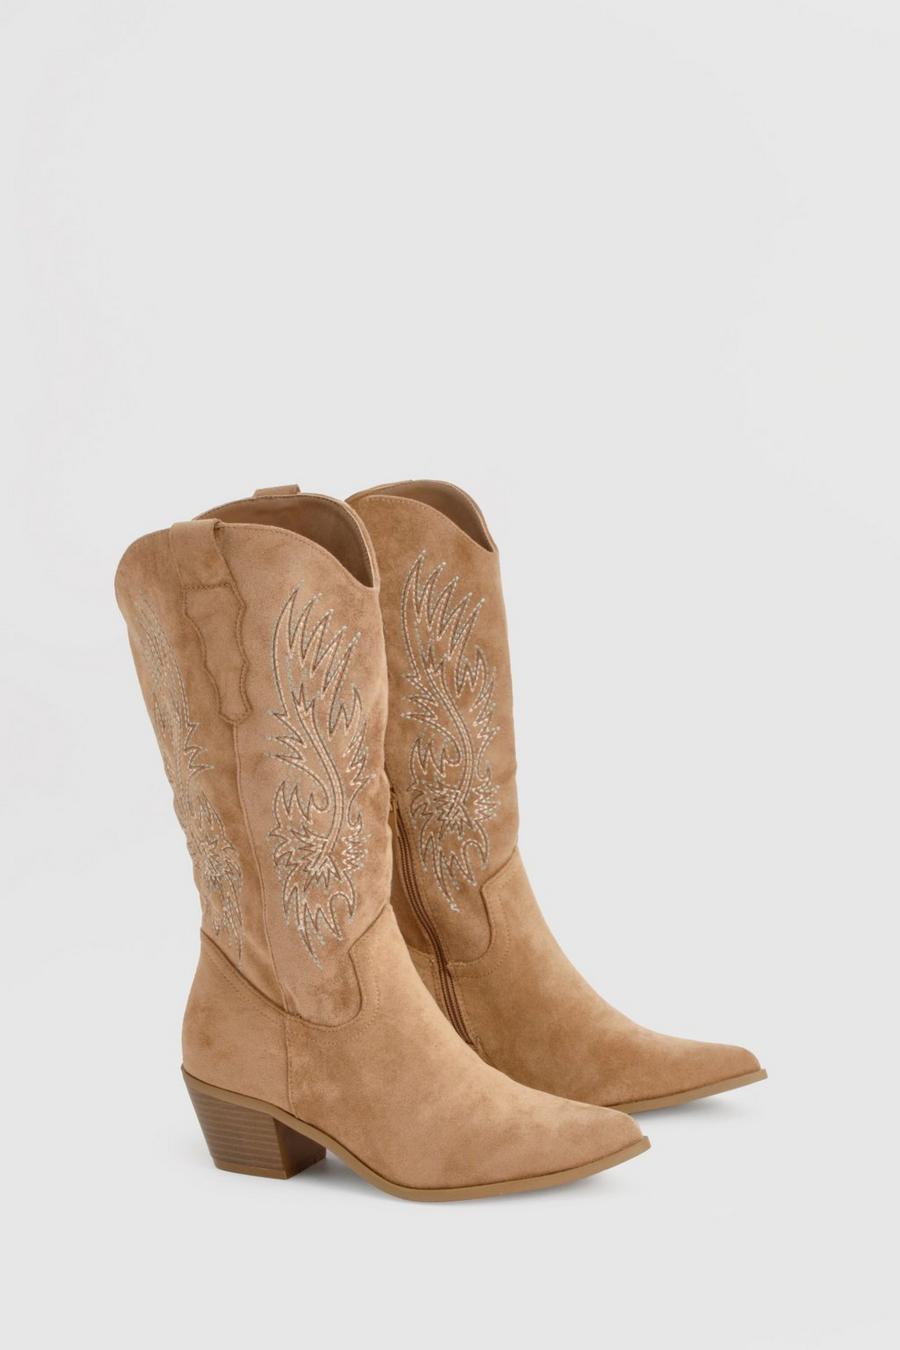 Camel Embroidered Knee High Cowboy Boots image number 1